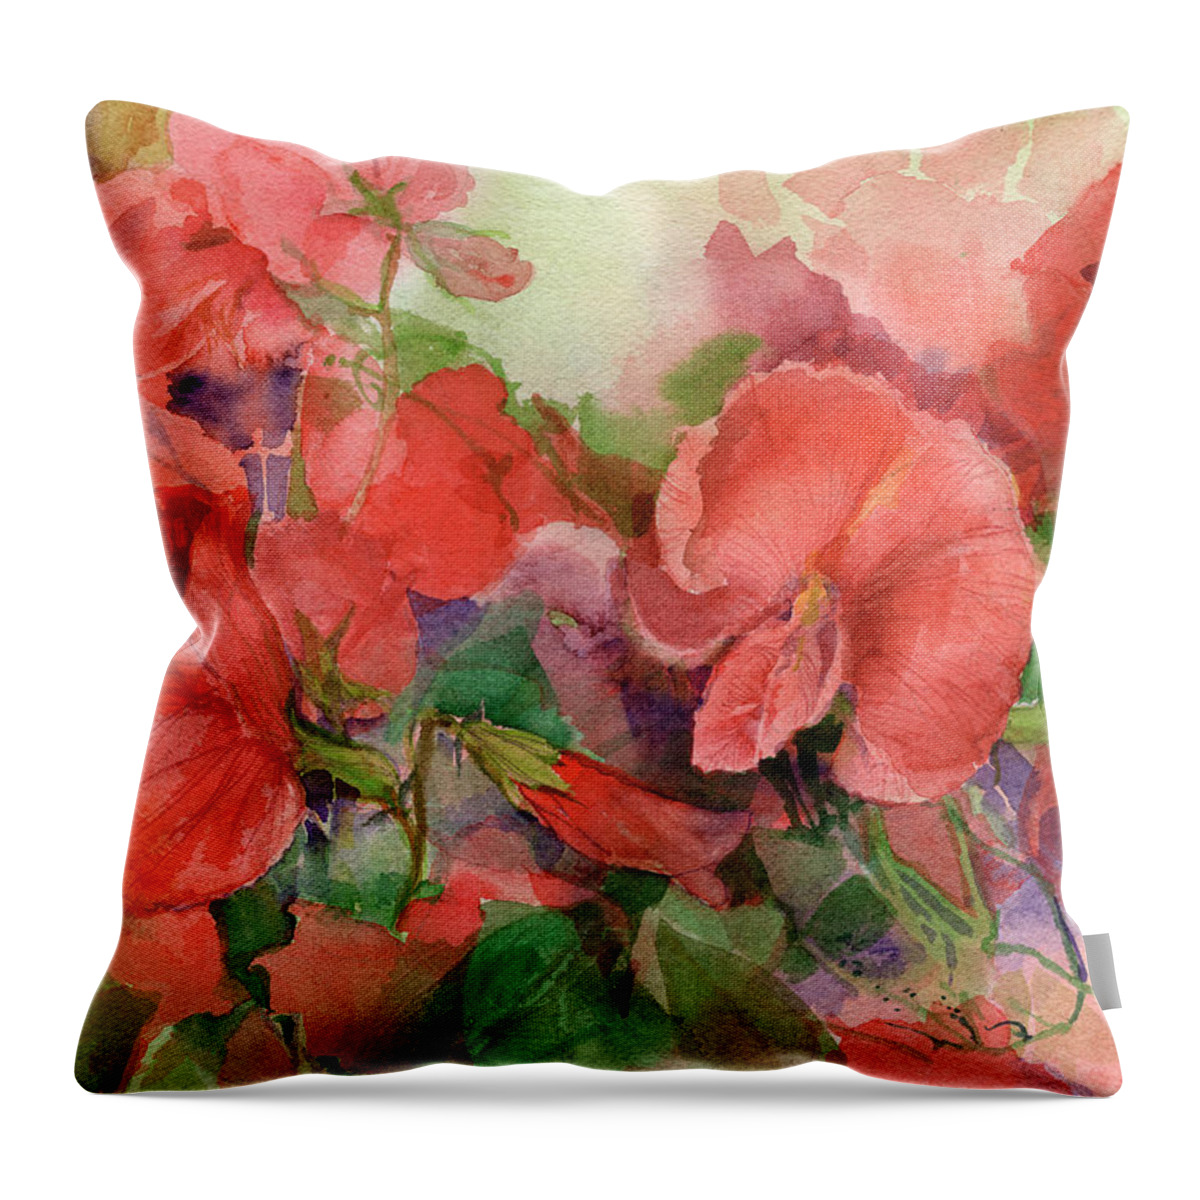 Sweet Pea Throw Pillow featuring the painting Sweet peas by Garden Gate